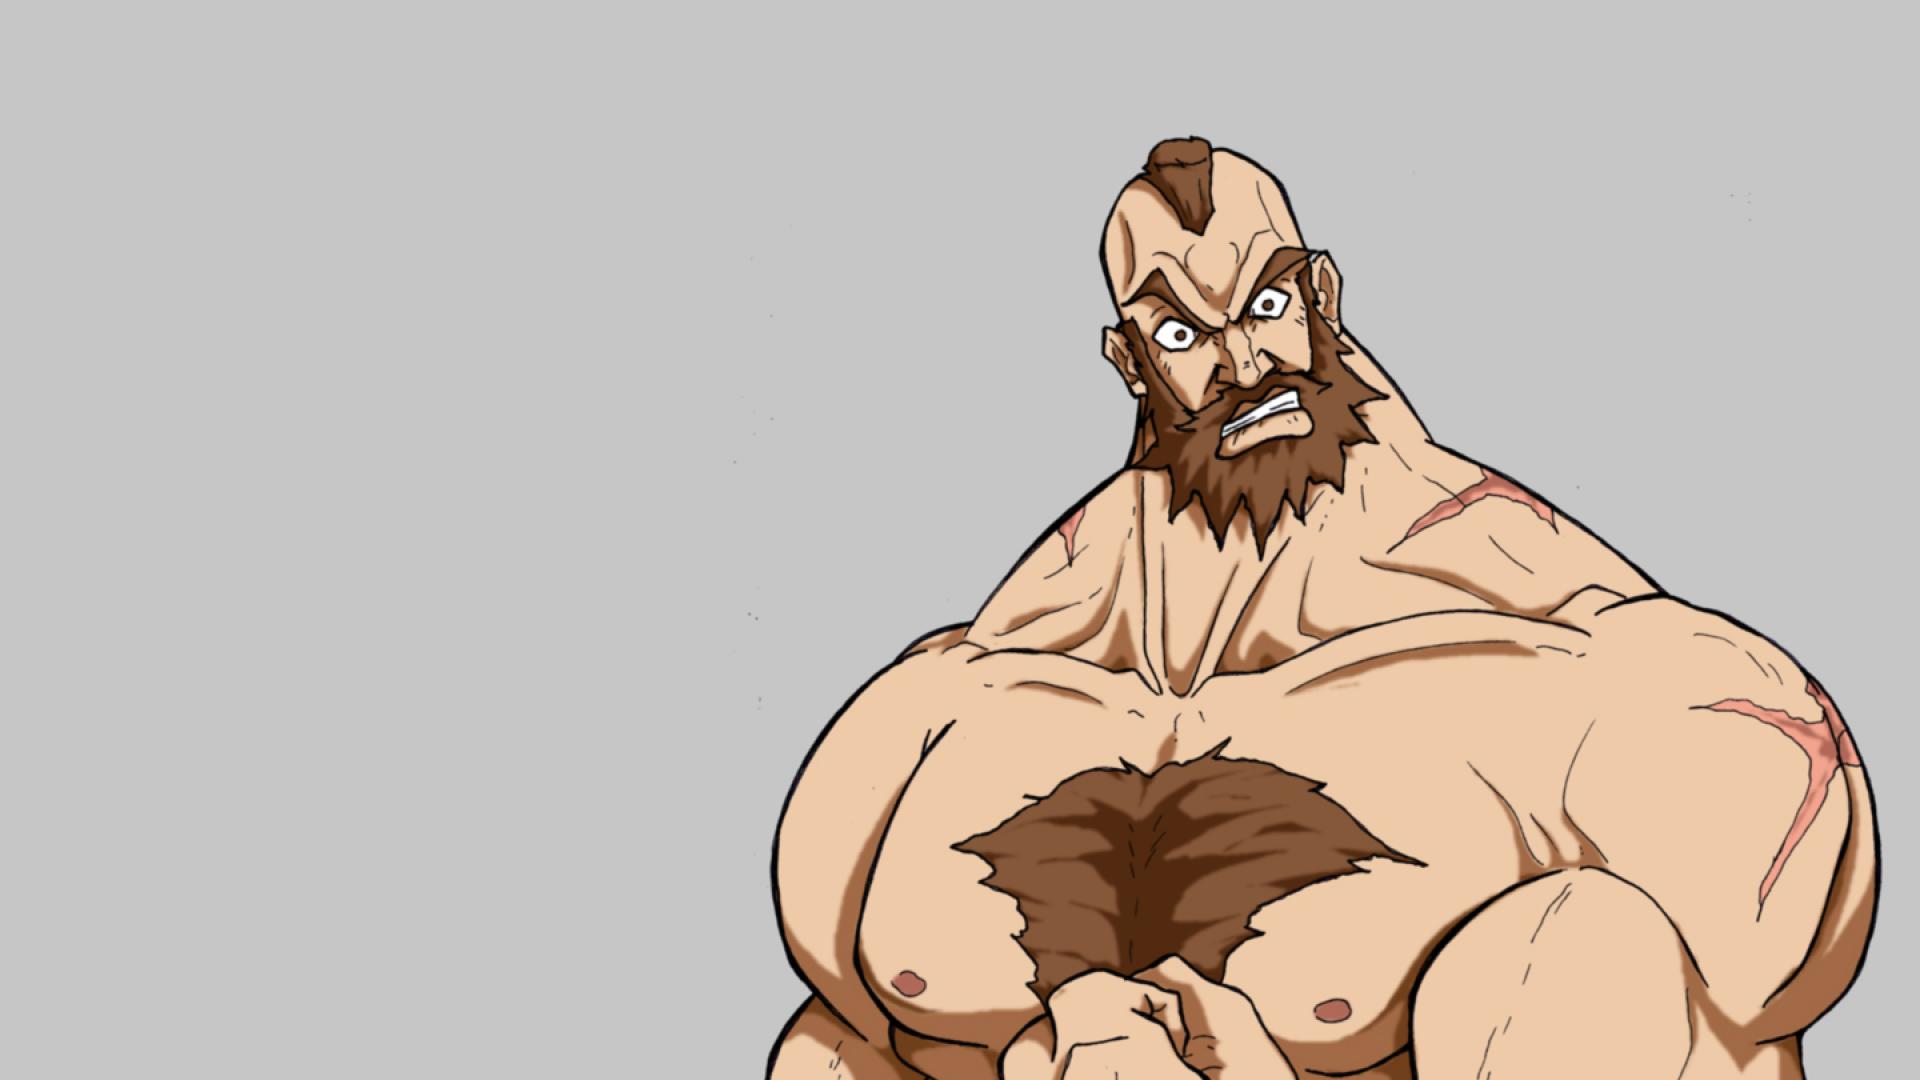 Zangief Wallpaper High Quality And Resolution